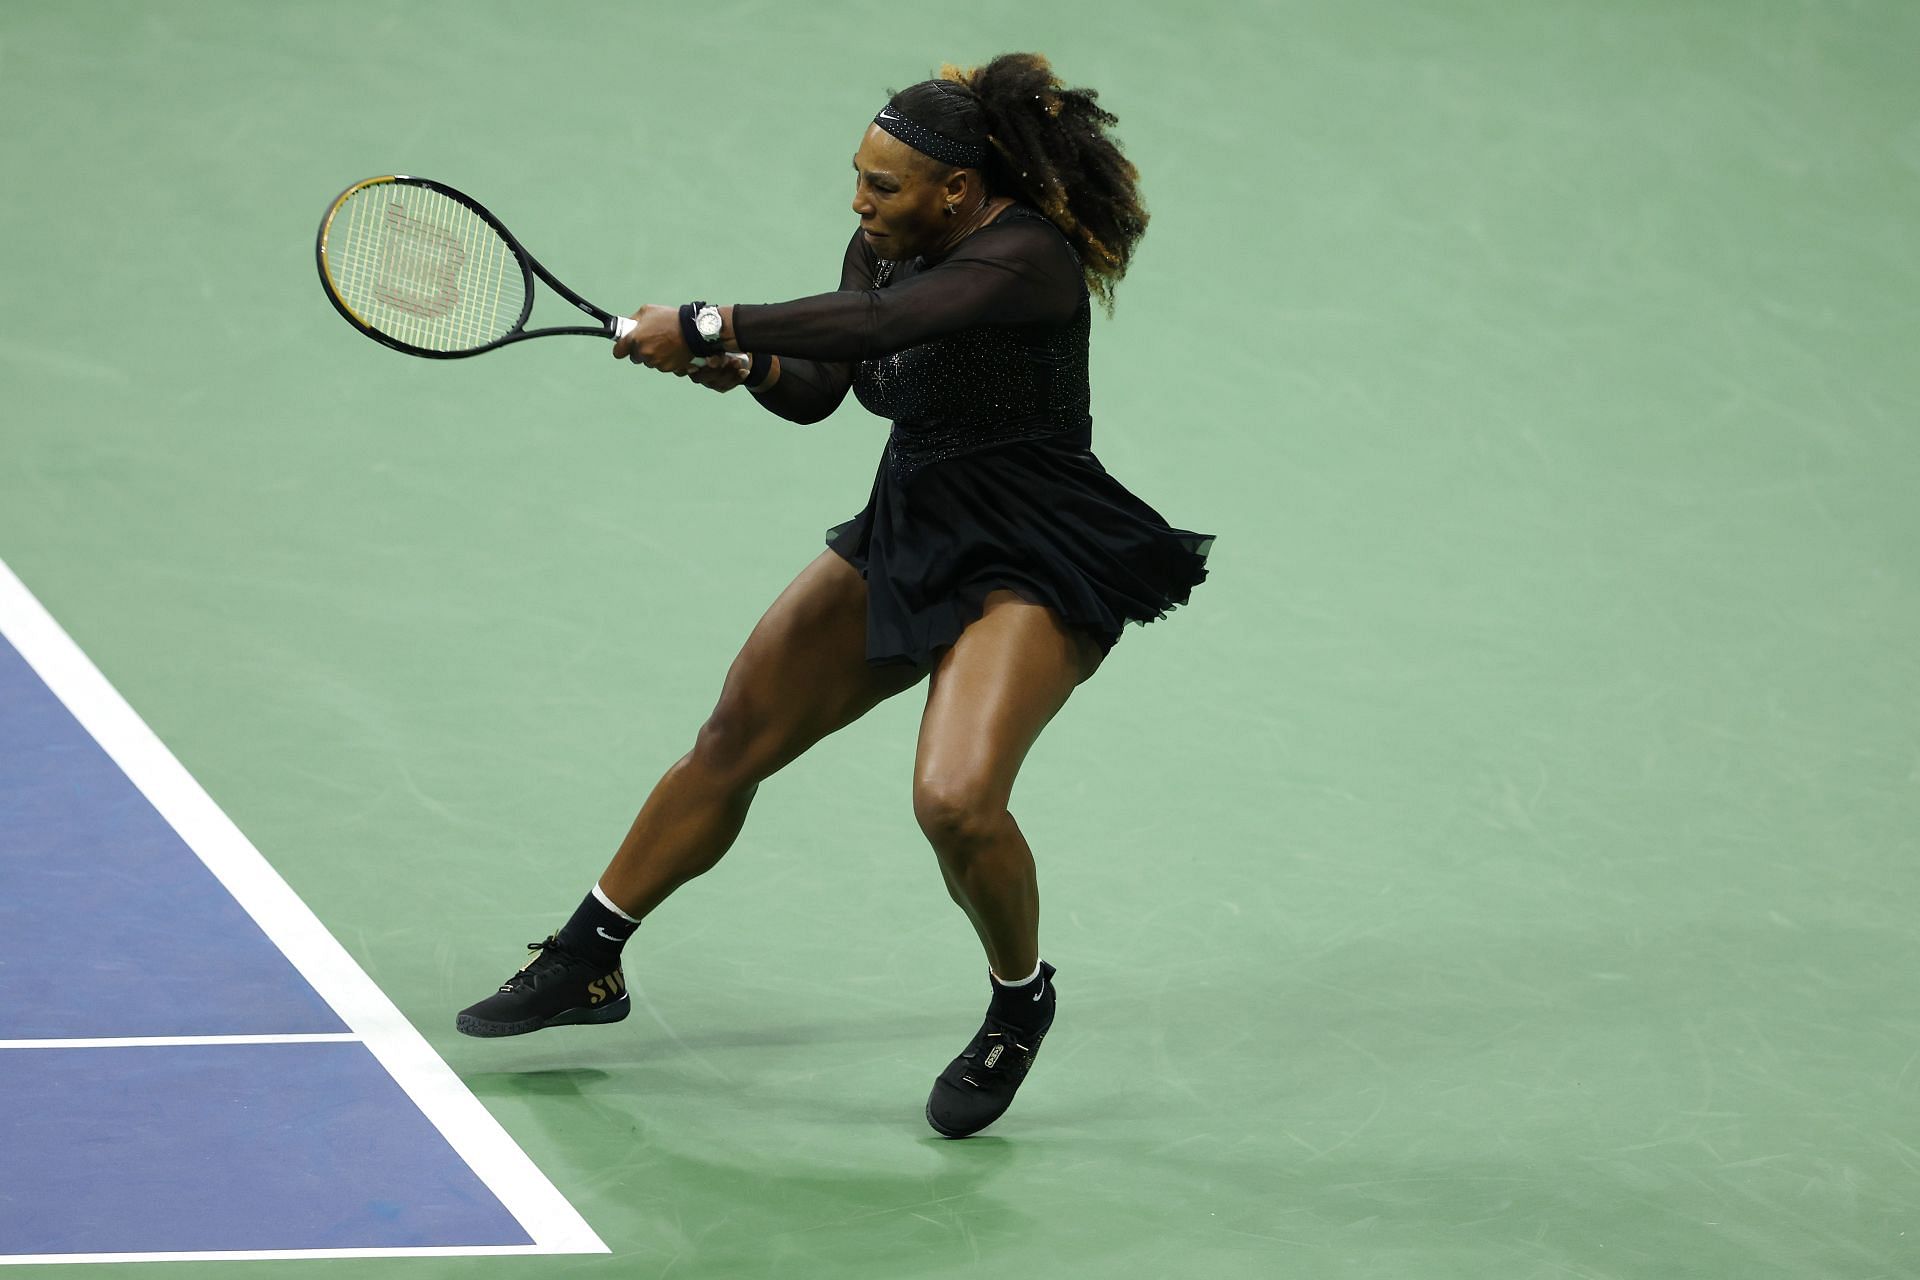 Serena Williams on Day 3 at the 2022 US Open